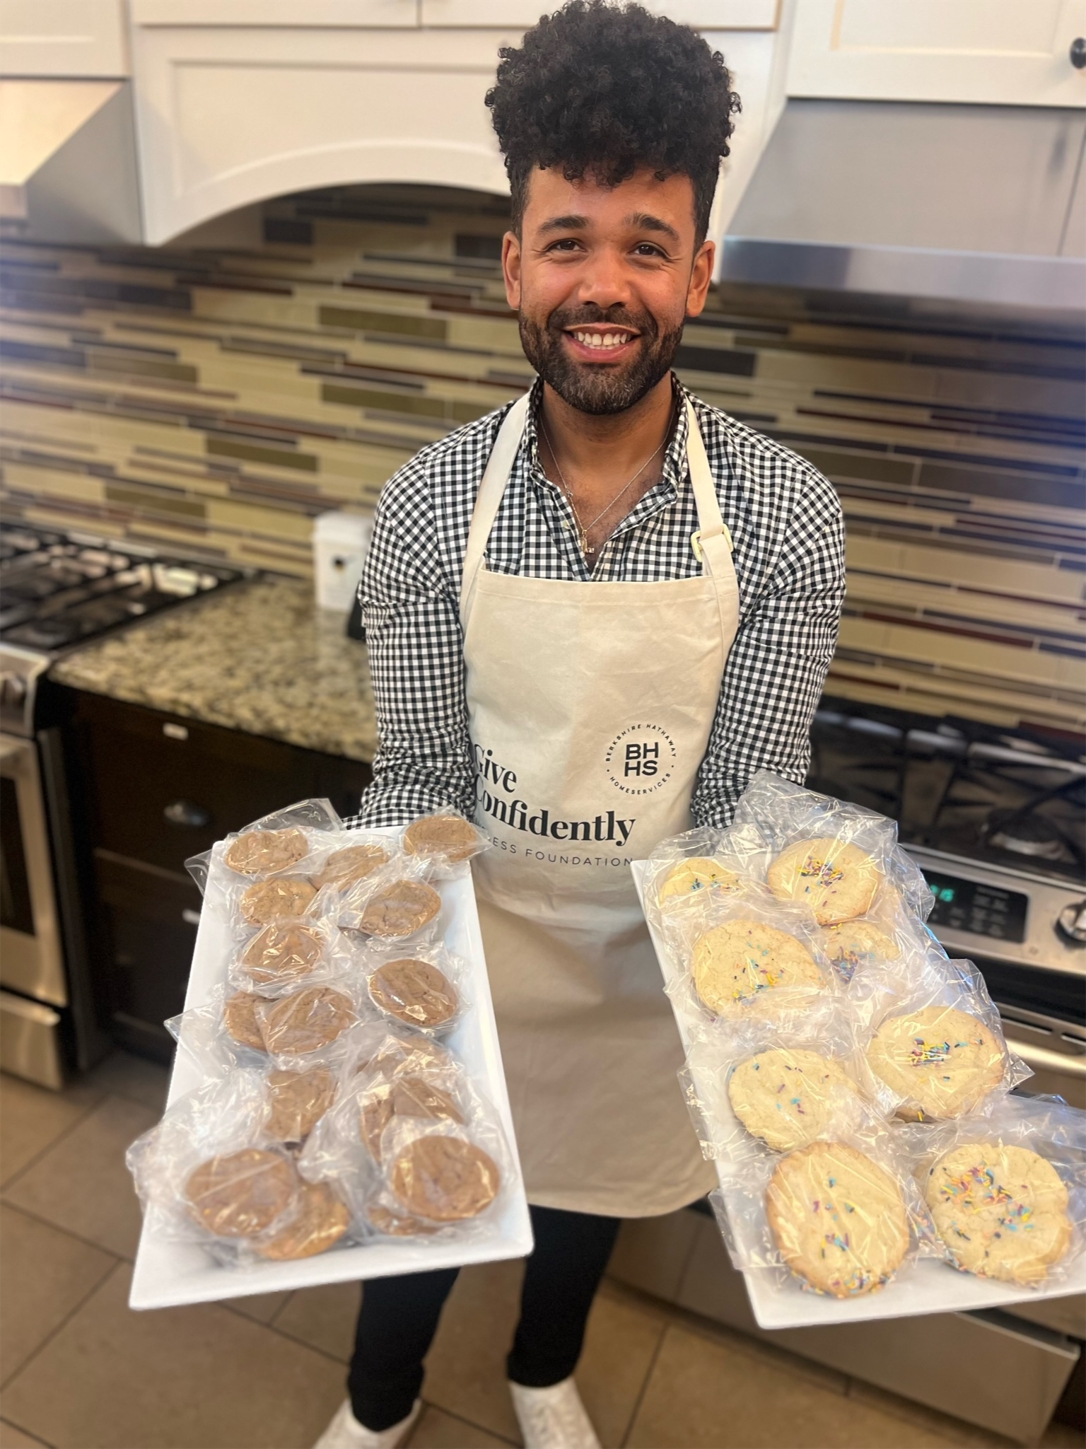 Knowing that warm cookies can provide comfort, agents and staff from BHHS Chicago’s Michigan Avenue office made Cookies From The Heart at Ronald McDonald House Near Lurie Children’s Hospital this summer.